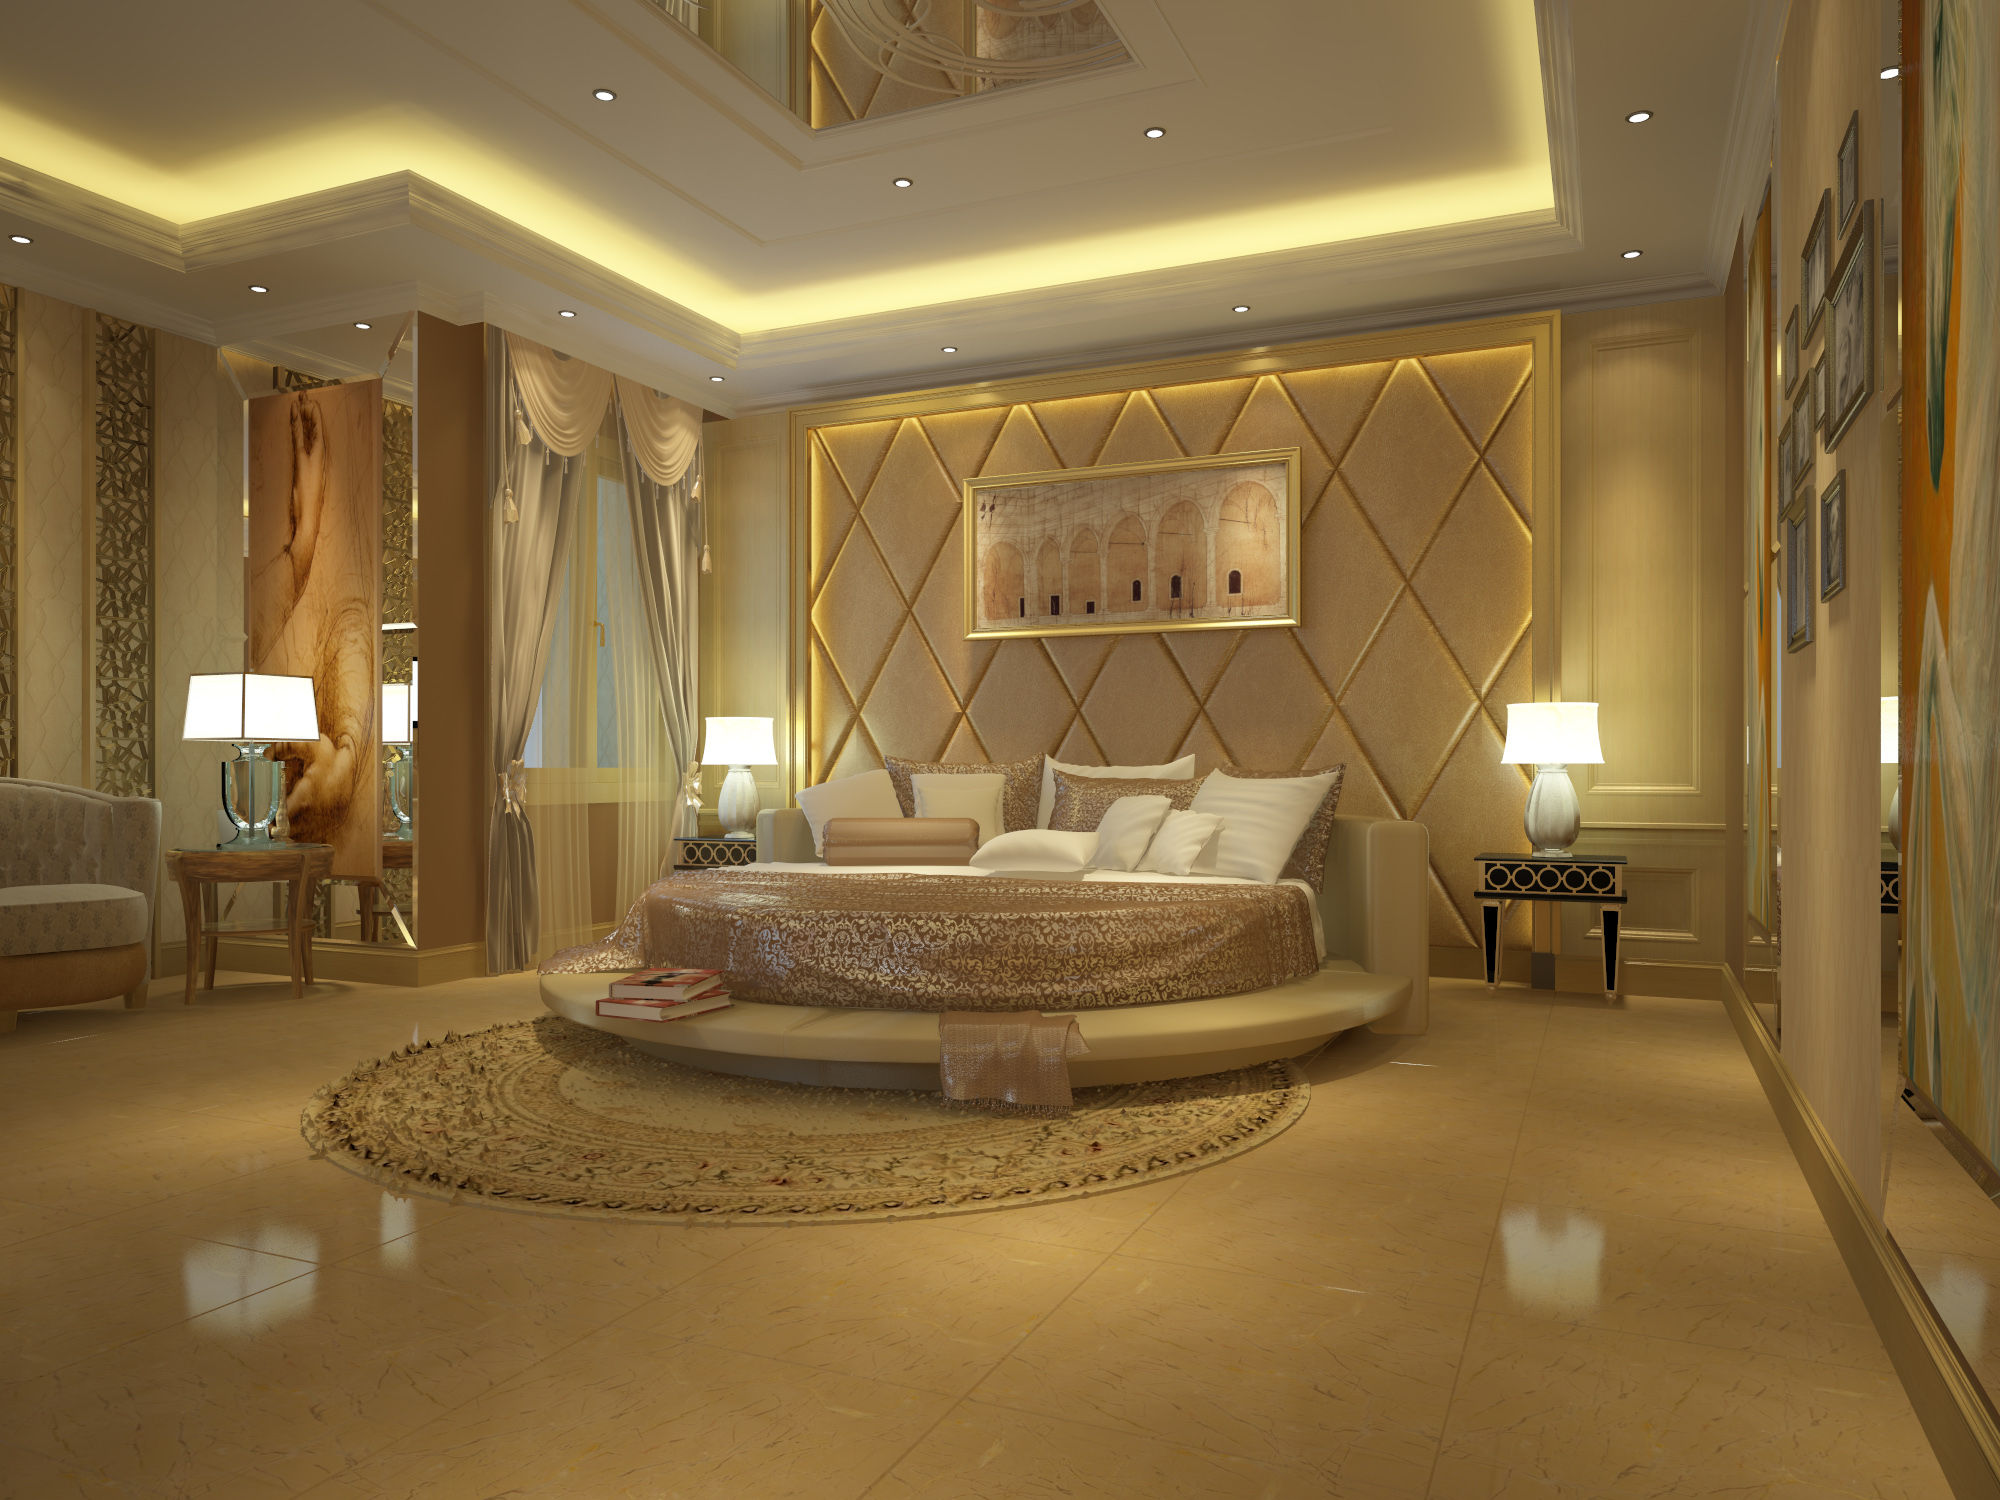 decorate-modern-romantic-master-bedroom-with-luxury-modern-round-master-bedroom-design-with-amazing-ceiling-lights-on-bedrooms